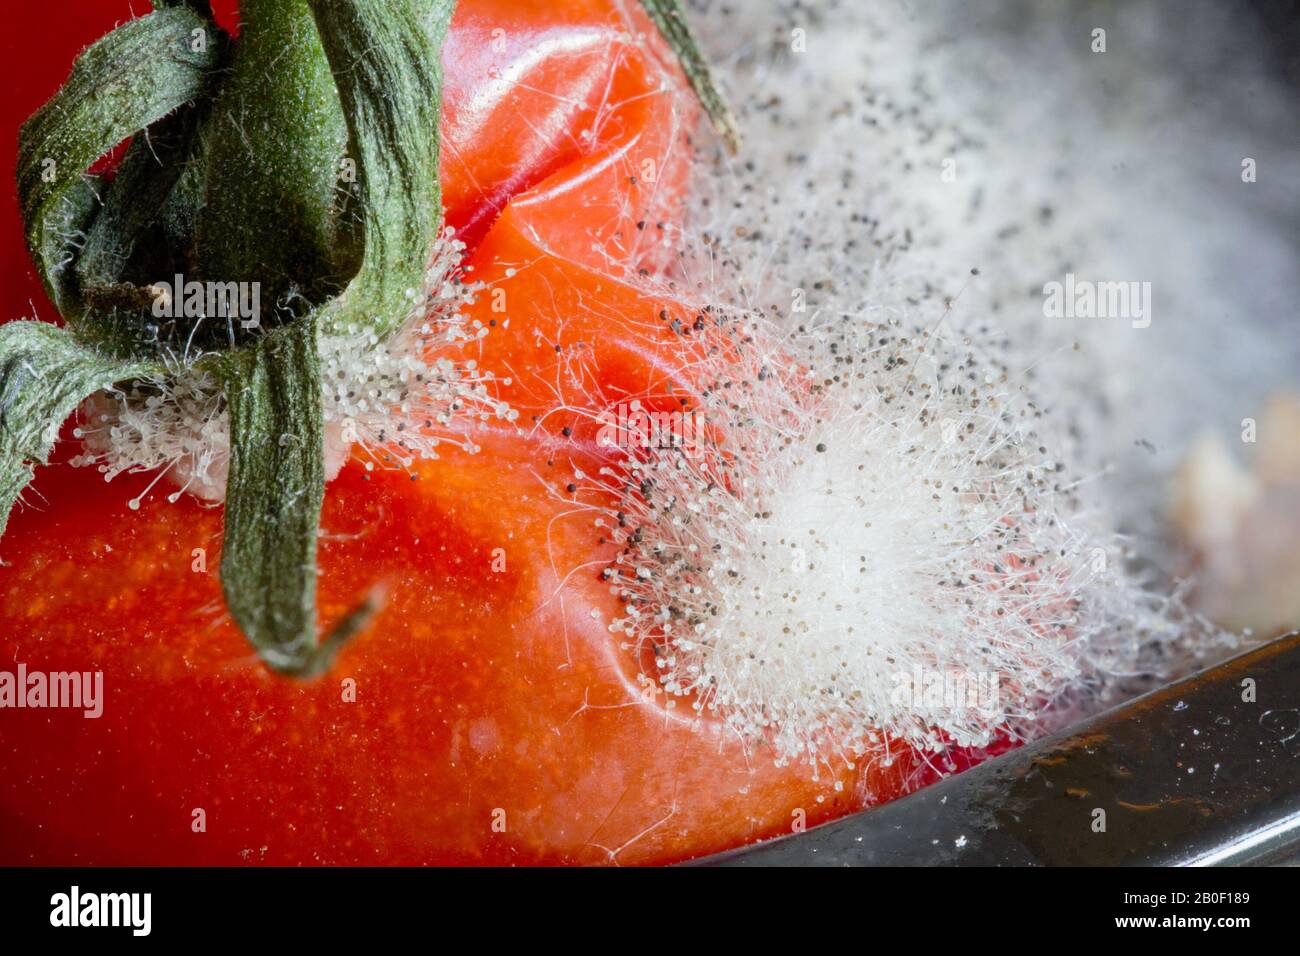 Close up of a decaying rotten tomato covered in fungal spores Stock Photo